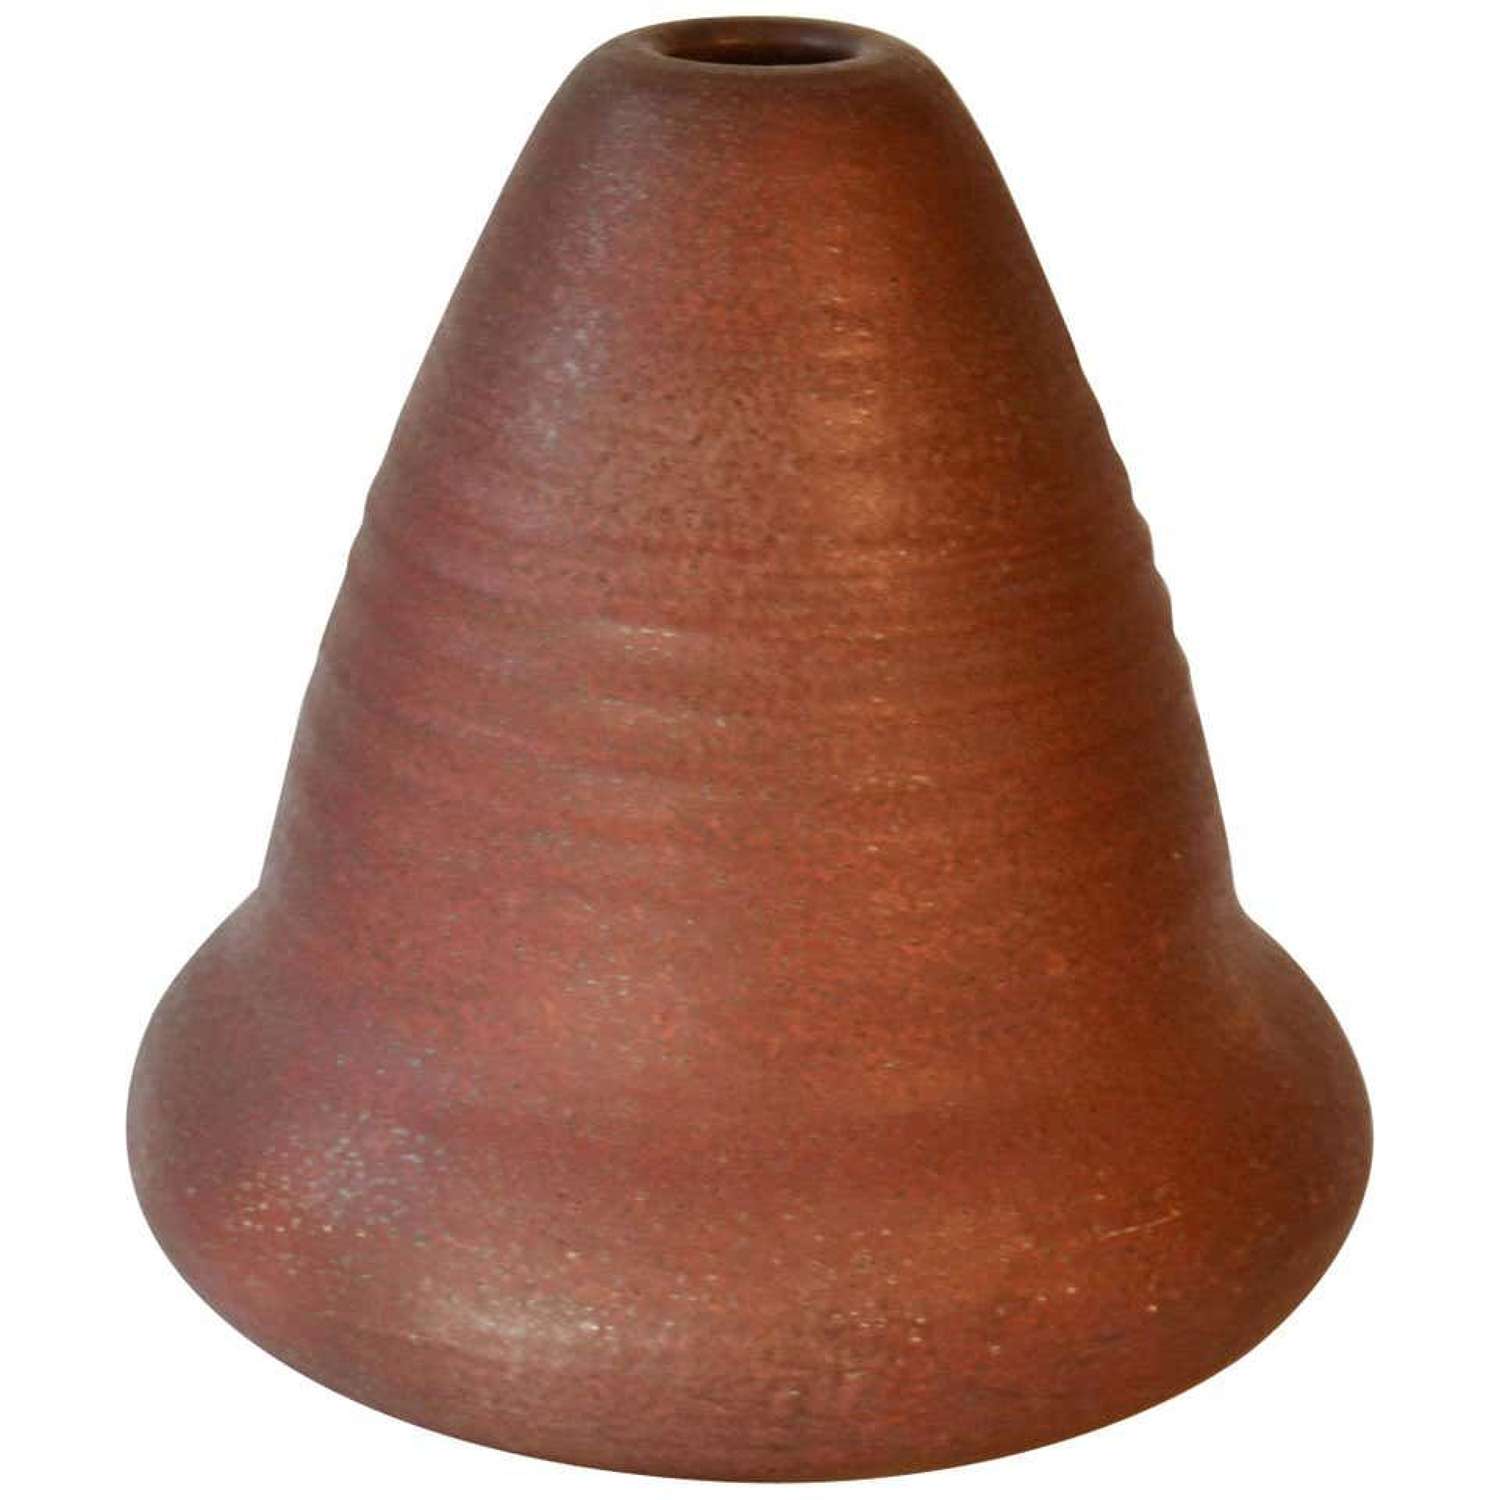 Sculptural Studio Pottery Vase with Ox Red Glaze